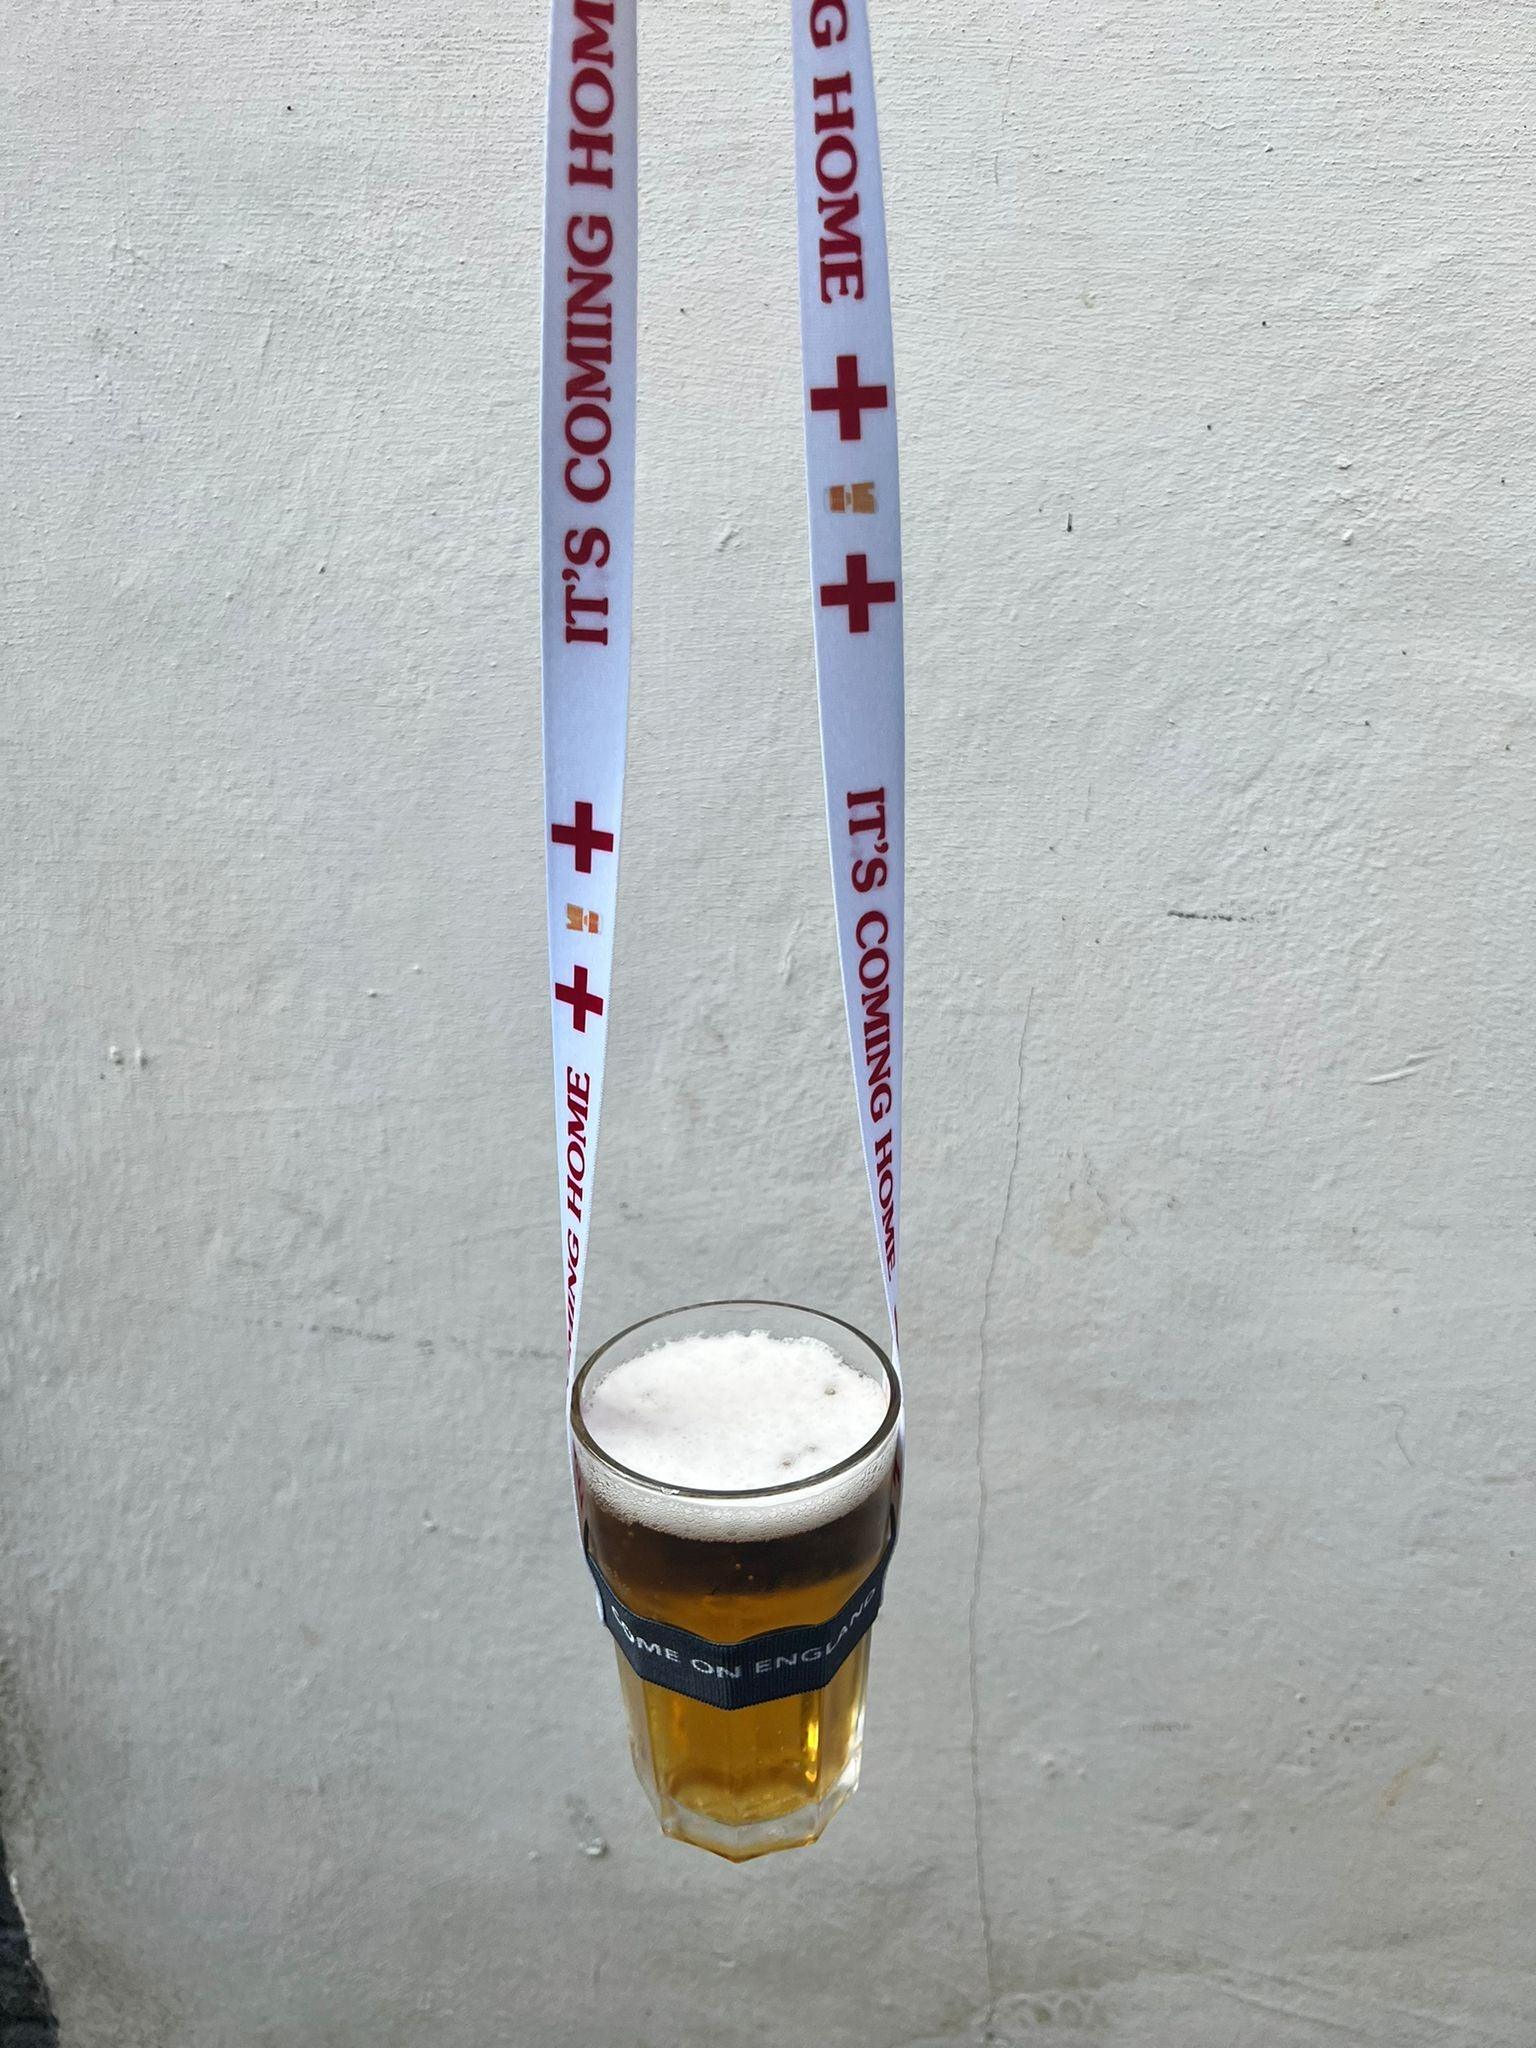 England Limited Edition Beer Lanyards X 2 Pack - #shop_name - #BeerLanyard